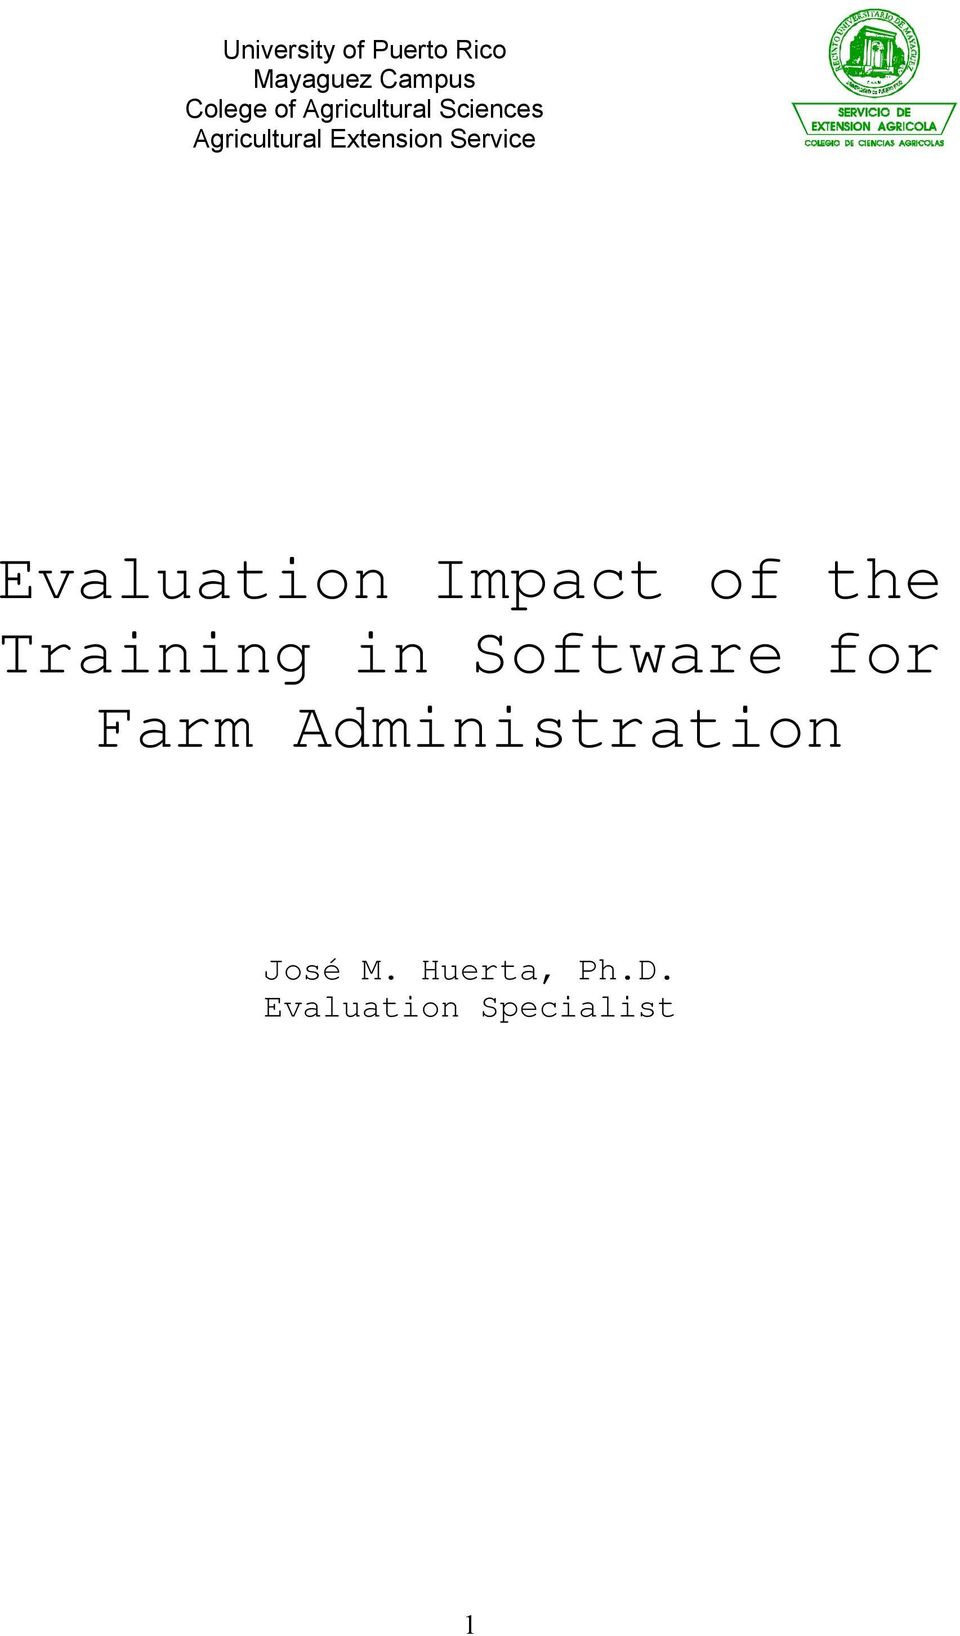 Evaluation Impact of the Training in Software for Farm